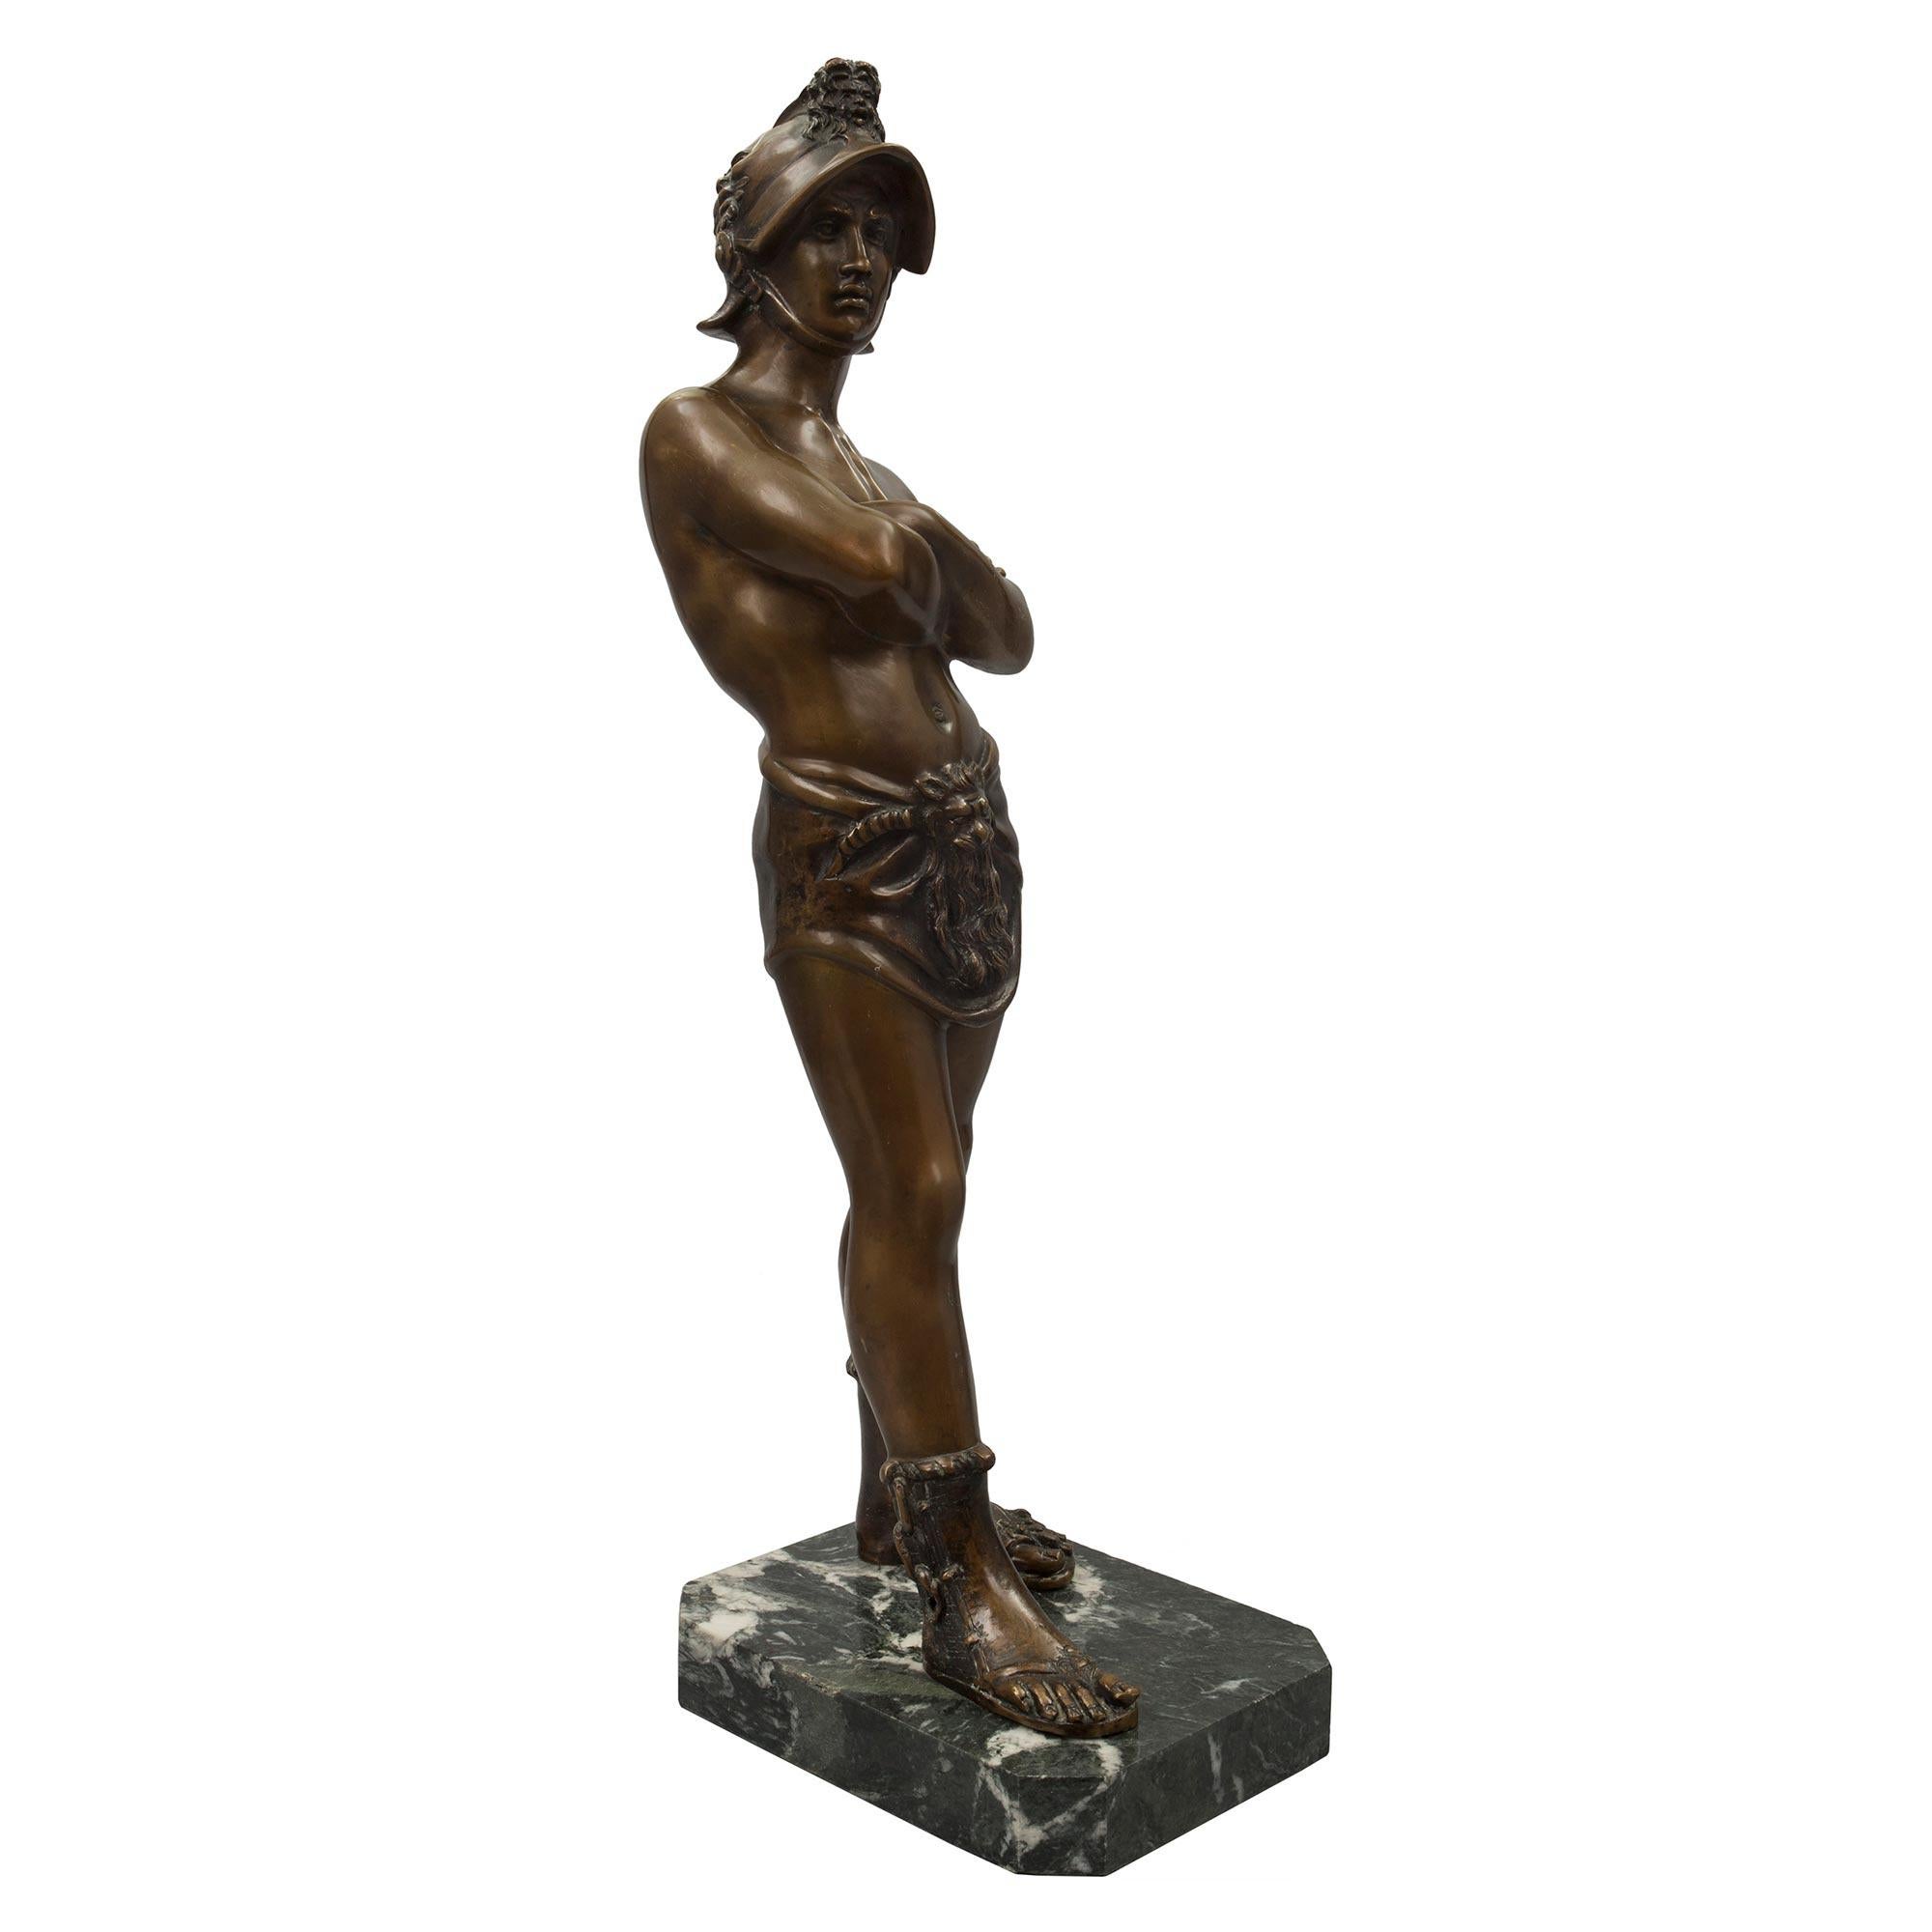 A handsome Italian 19th century patinated bronze statue of a young gladiator. The statue is raised by a rectangular Verde Antico marble base. The gladiator is standing proudly with his arms crossed and is wearing period strapped sandals below broken